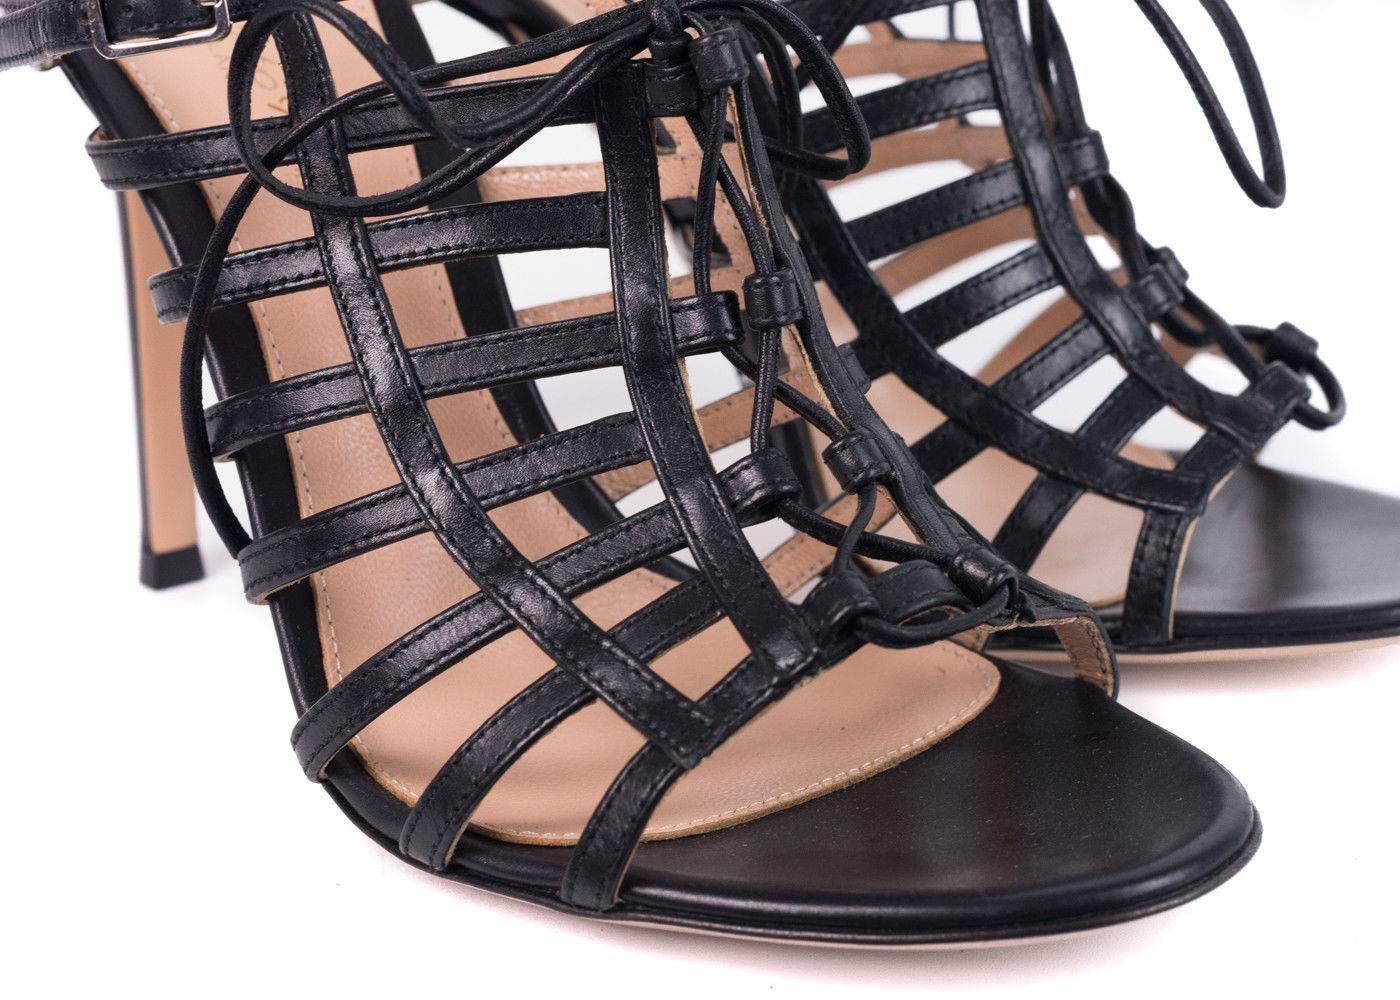 Brand New Gianvito Rossi Stiletto Sandals
Retails In-Store & Online for $895
Size IT 37 / US 7

Gianvito Rossi's Stiletto Sandals are ideal for that day into night event. A structured caged heel with lacing at the center vamp and a wrapped ankle